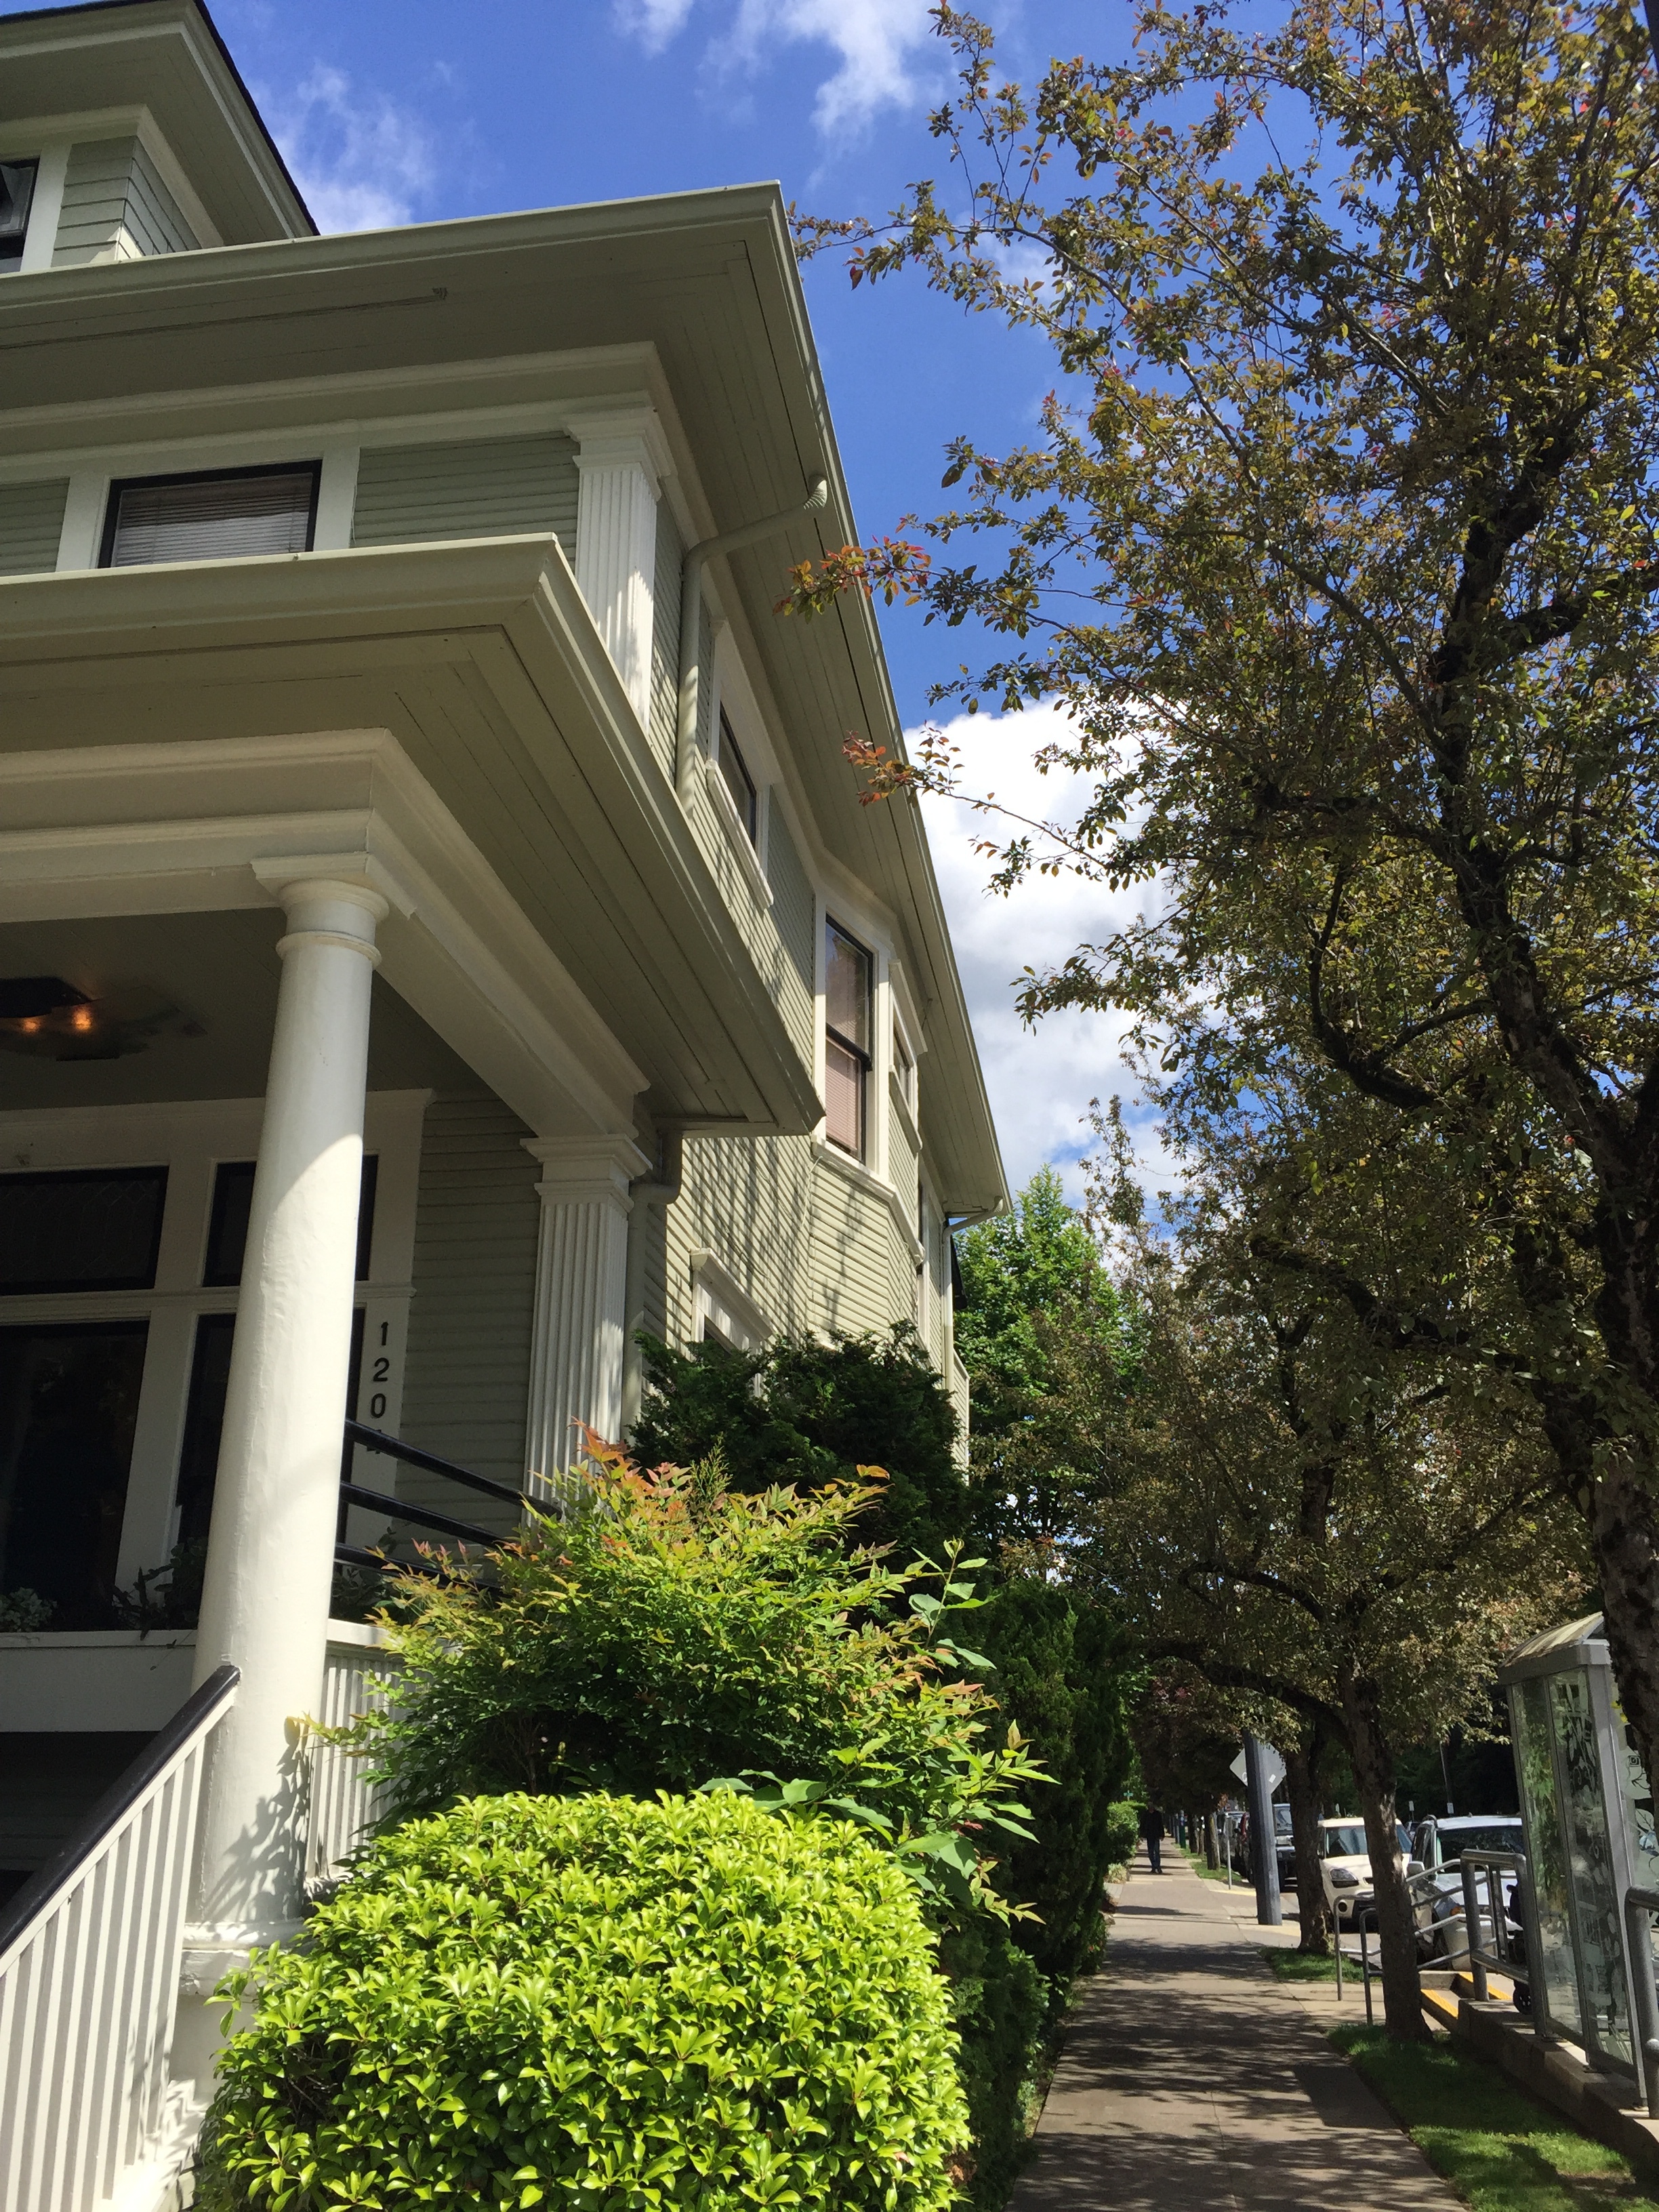  Nestled on a leafy street in Northwest Portland, Paley's Place is located inside a charming Victorian home. 